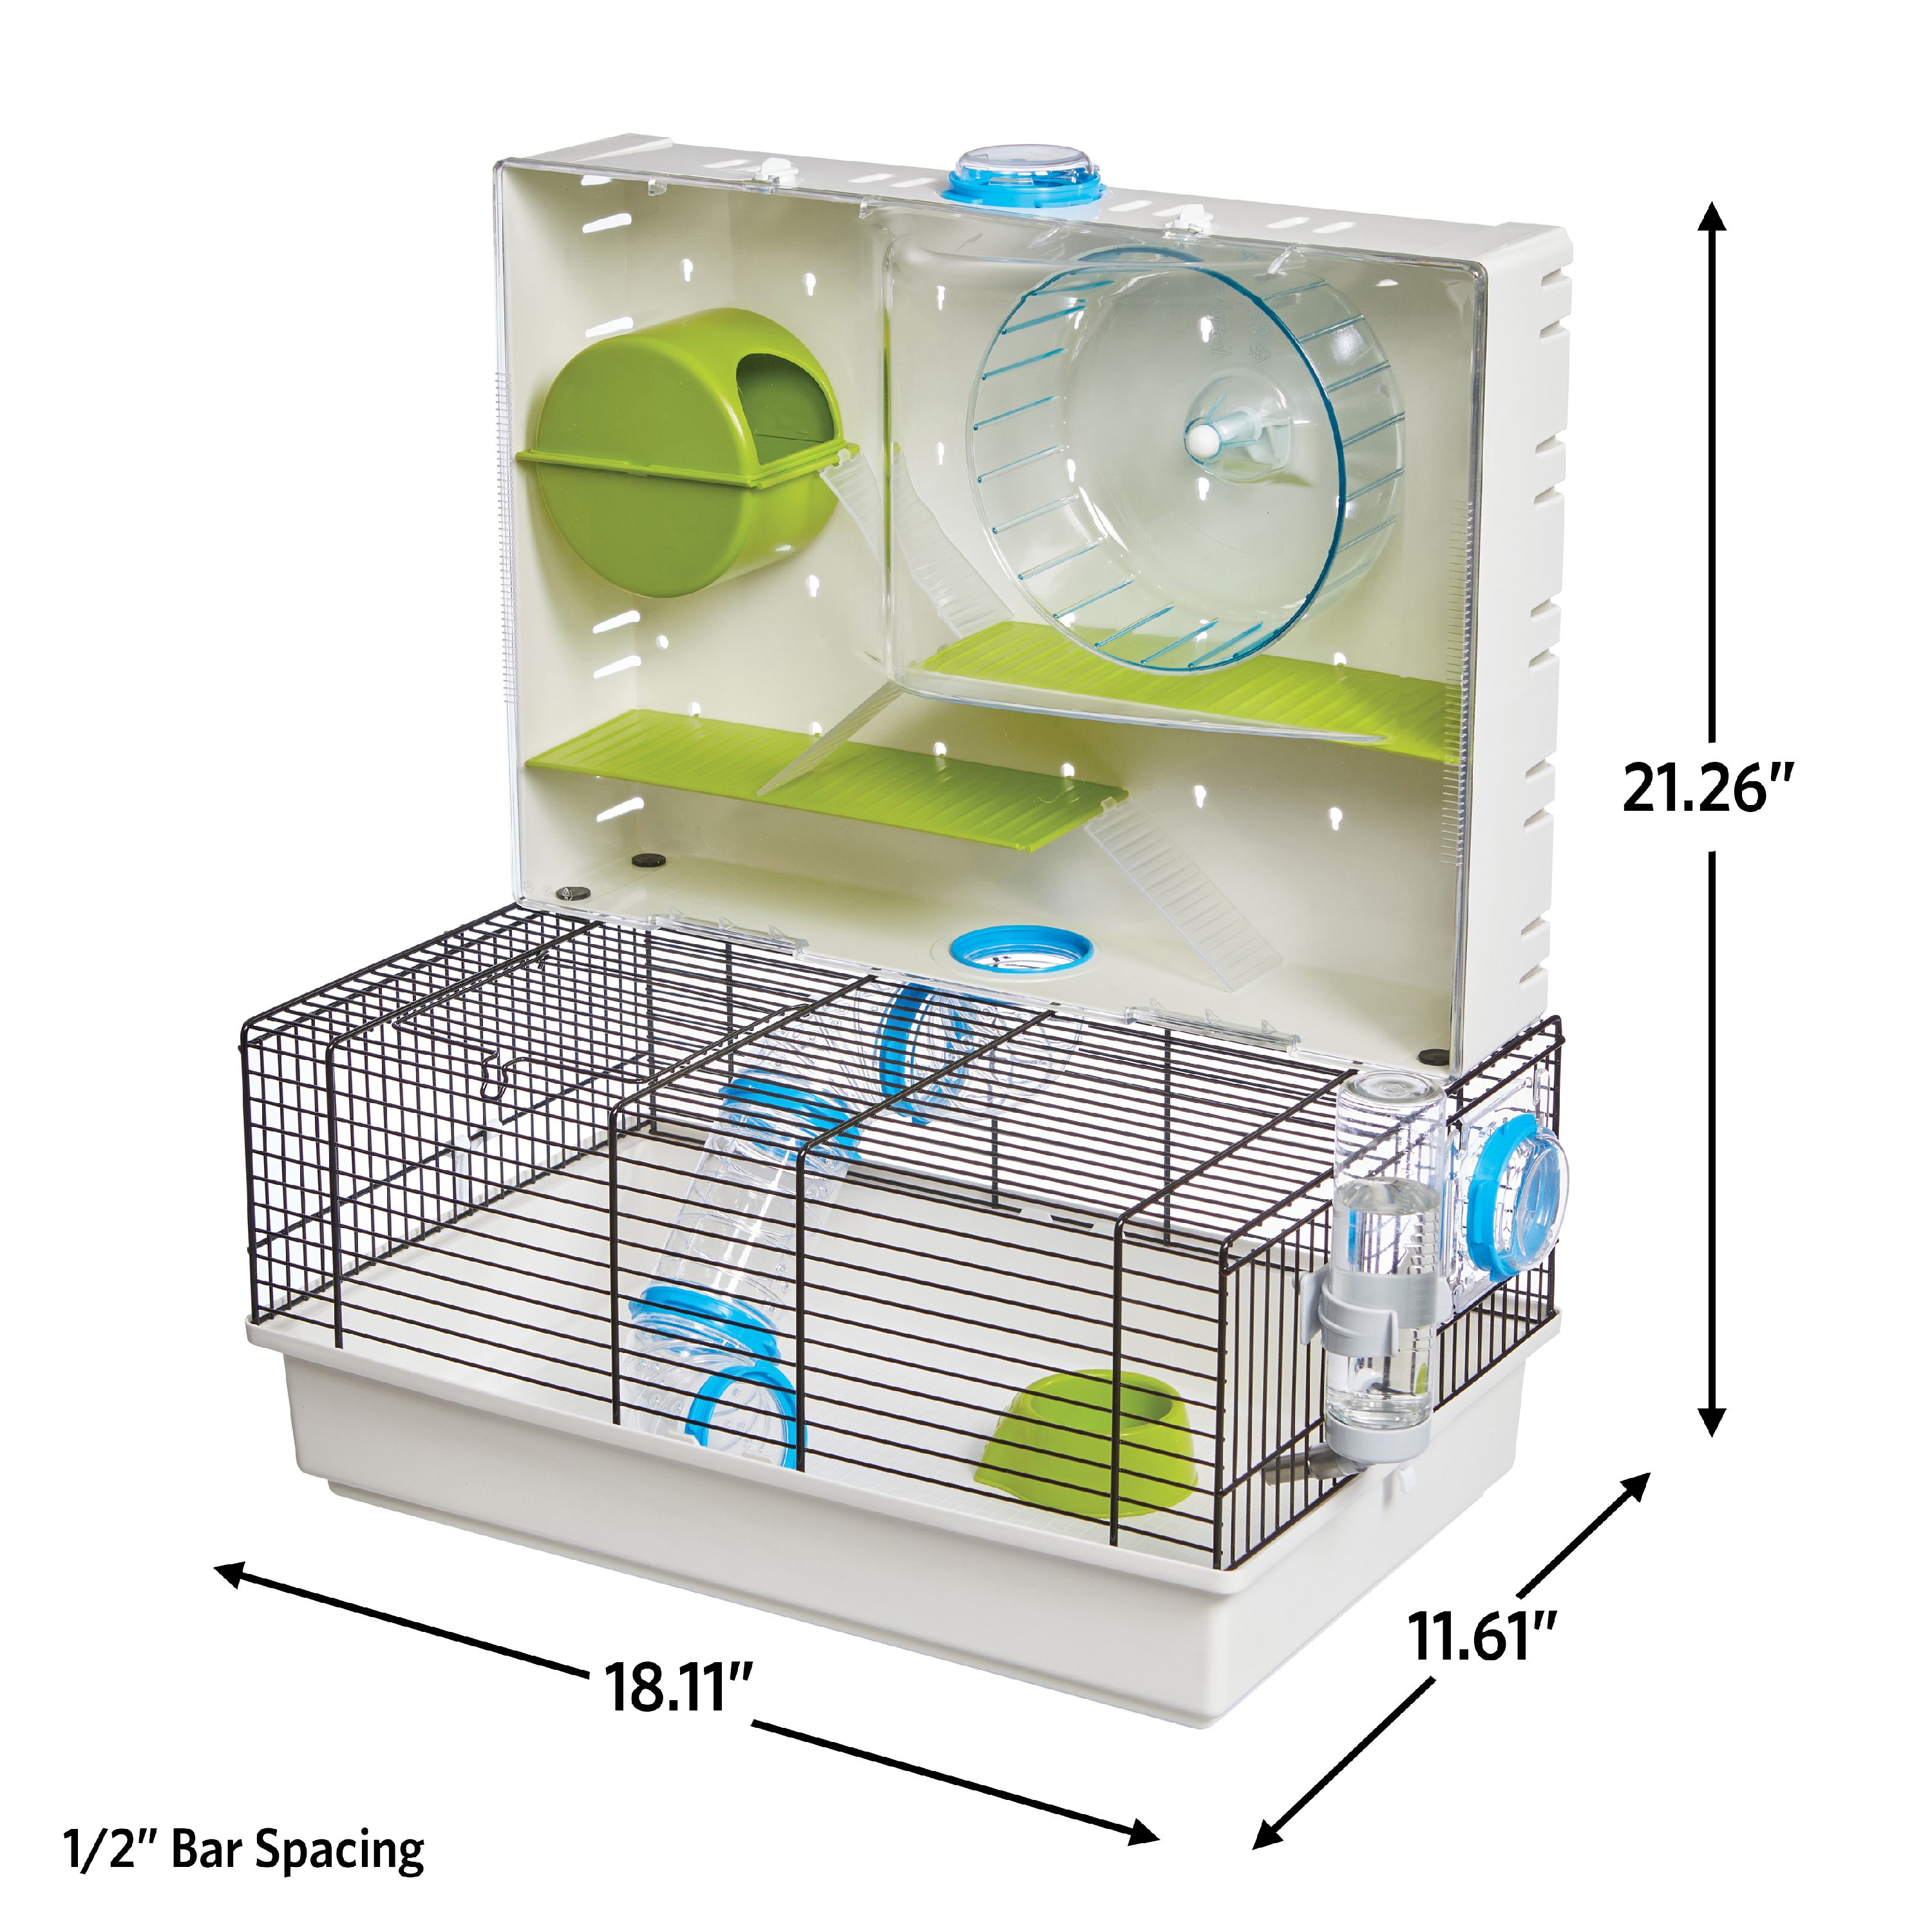 Arcade Hamster Cage - image 2 of 7